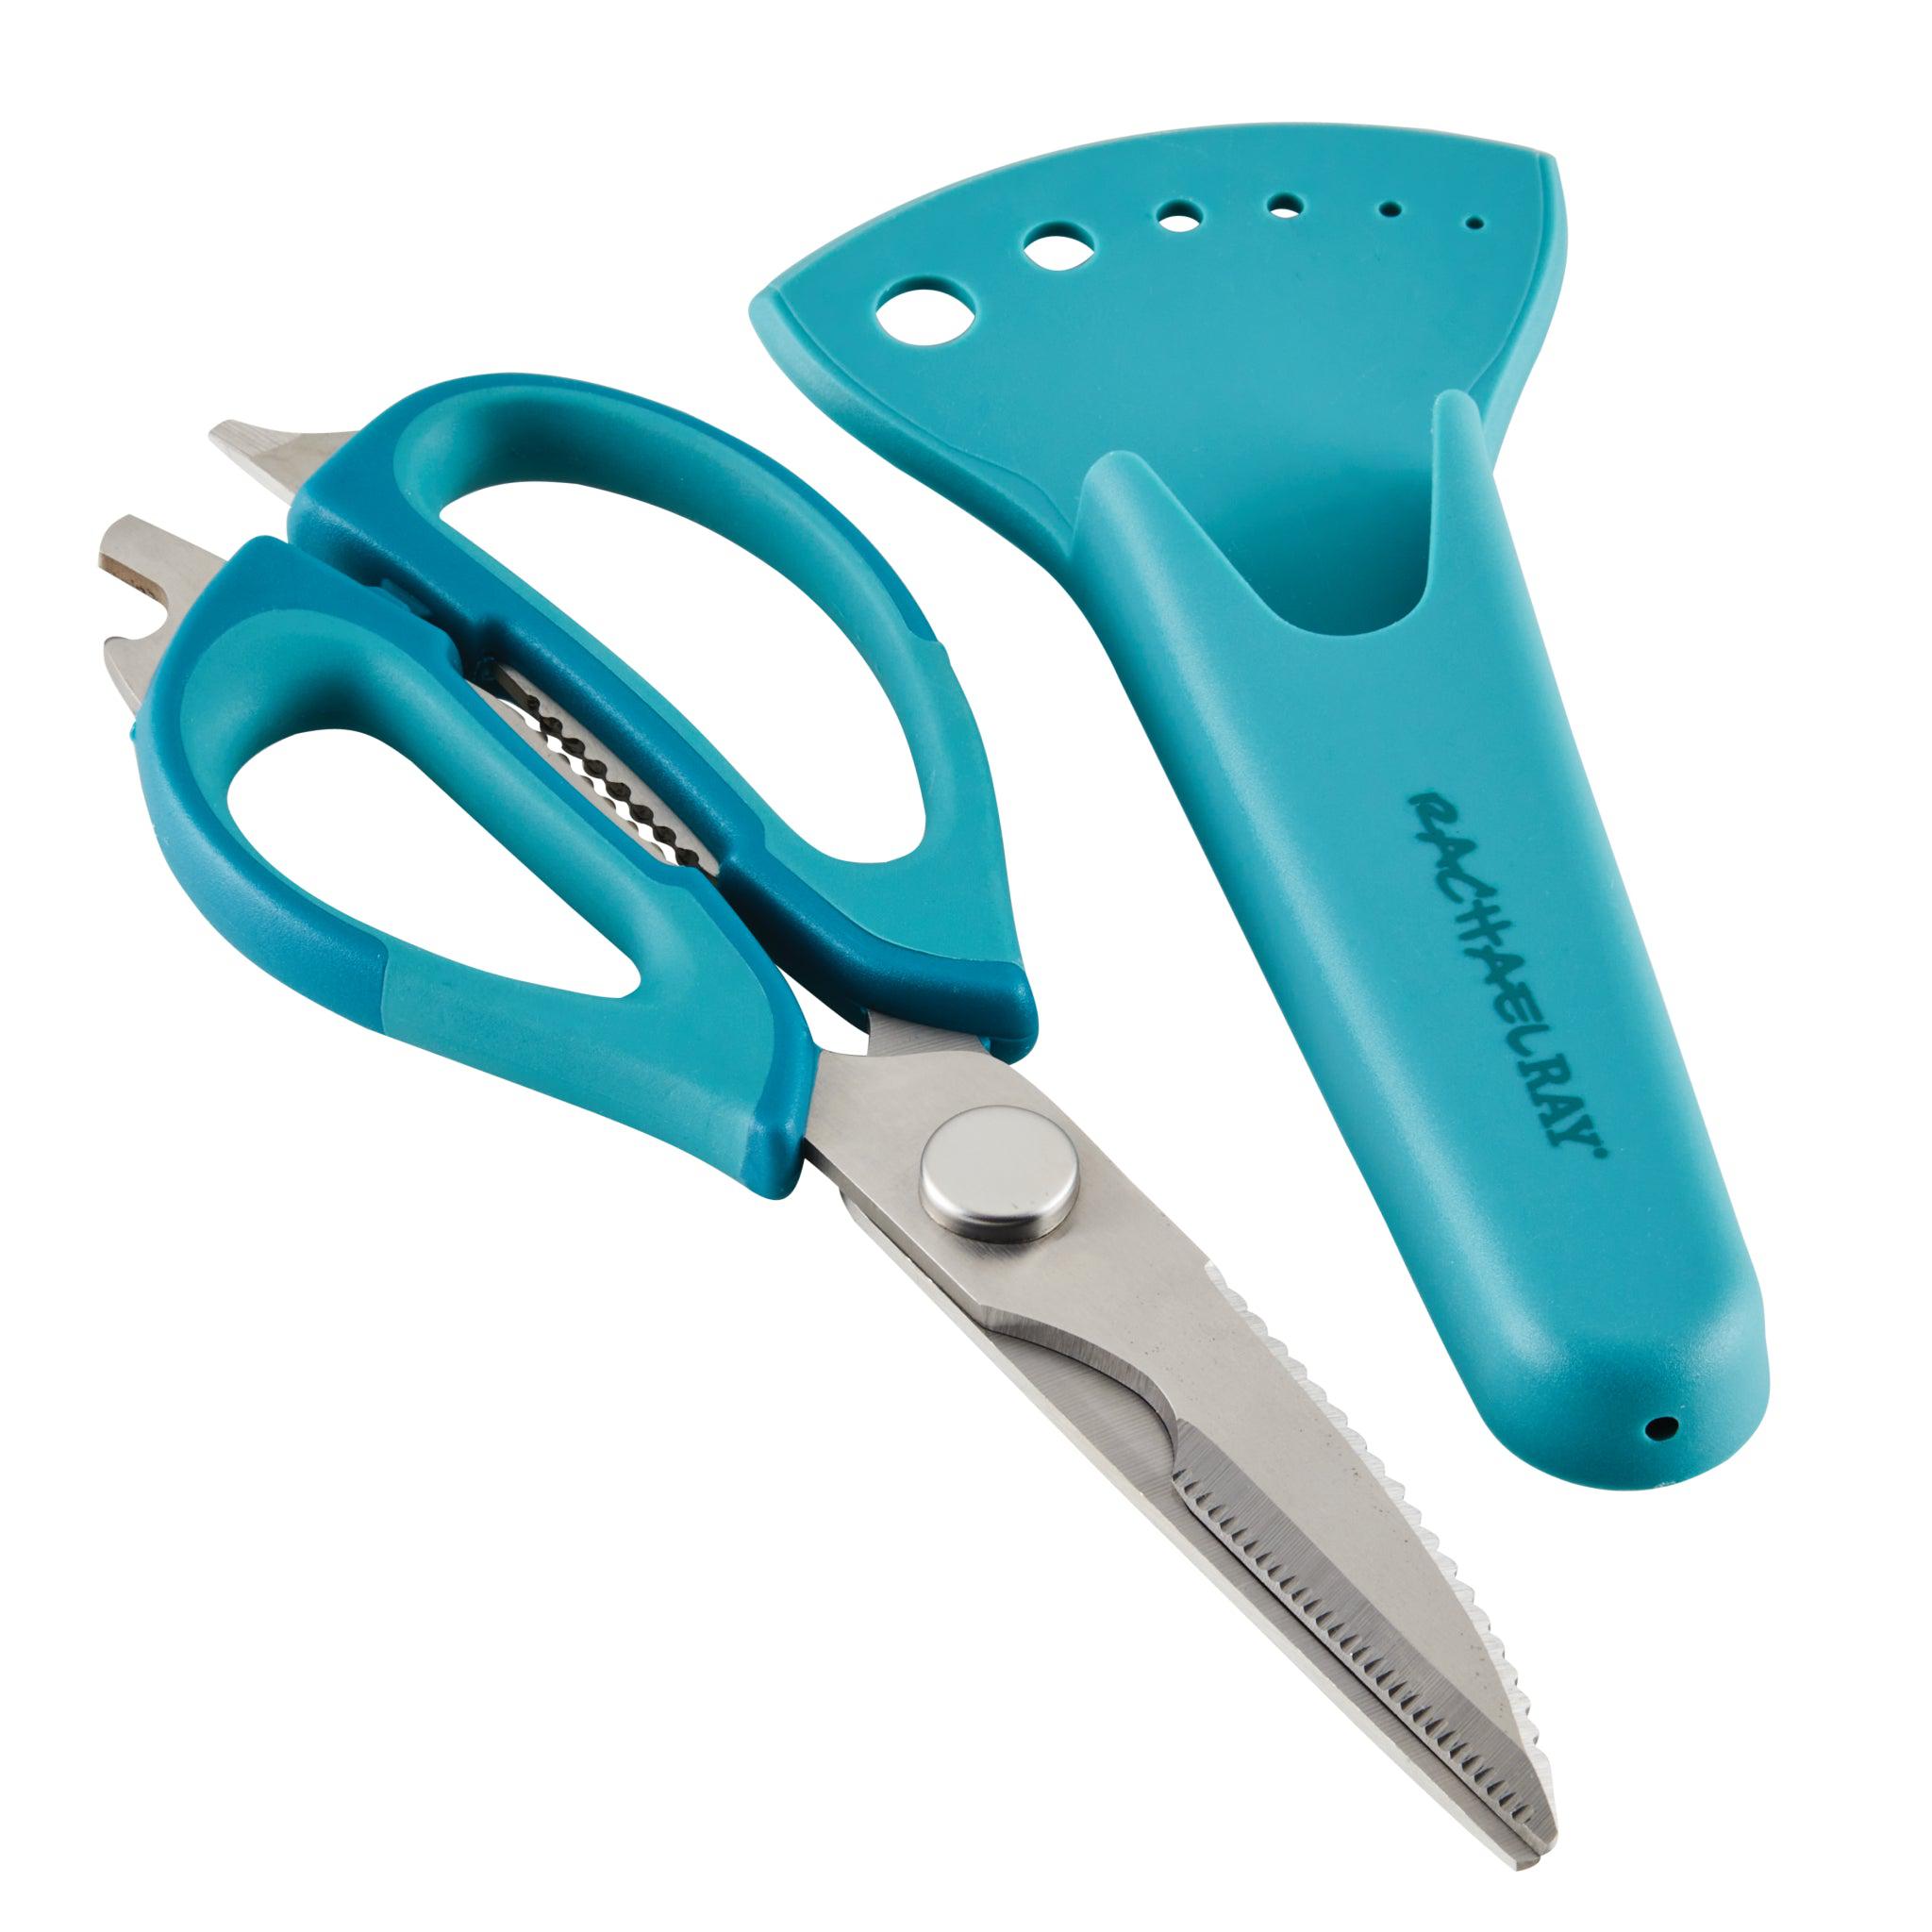 Kitchen Shears, Green, Kitchen Scissors Stainless Steel Come Apart  Multipurpose, Heavy Duty Sharp, Easy Wash with Magnetic Holder, for Food,  Meat